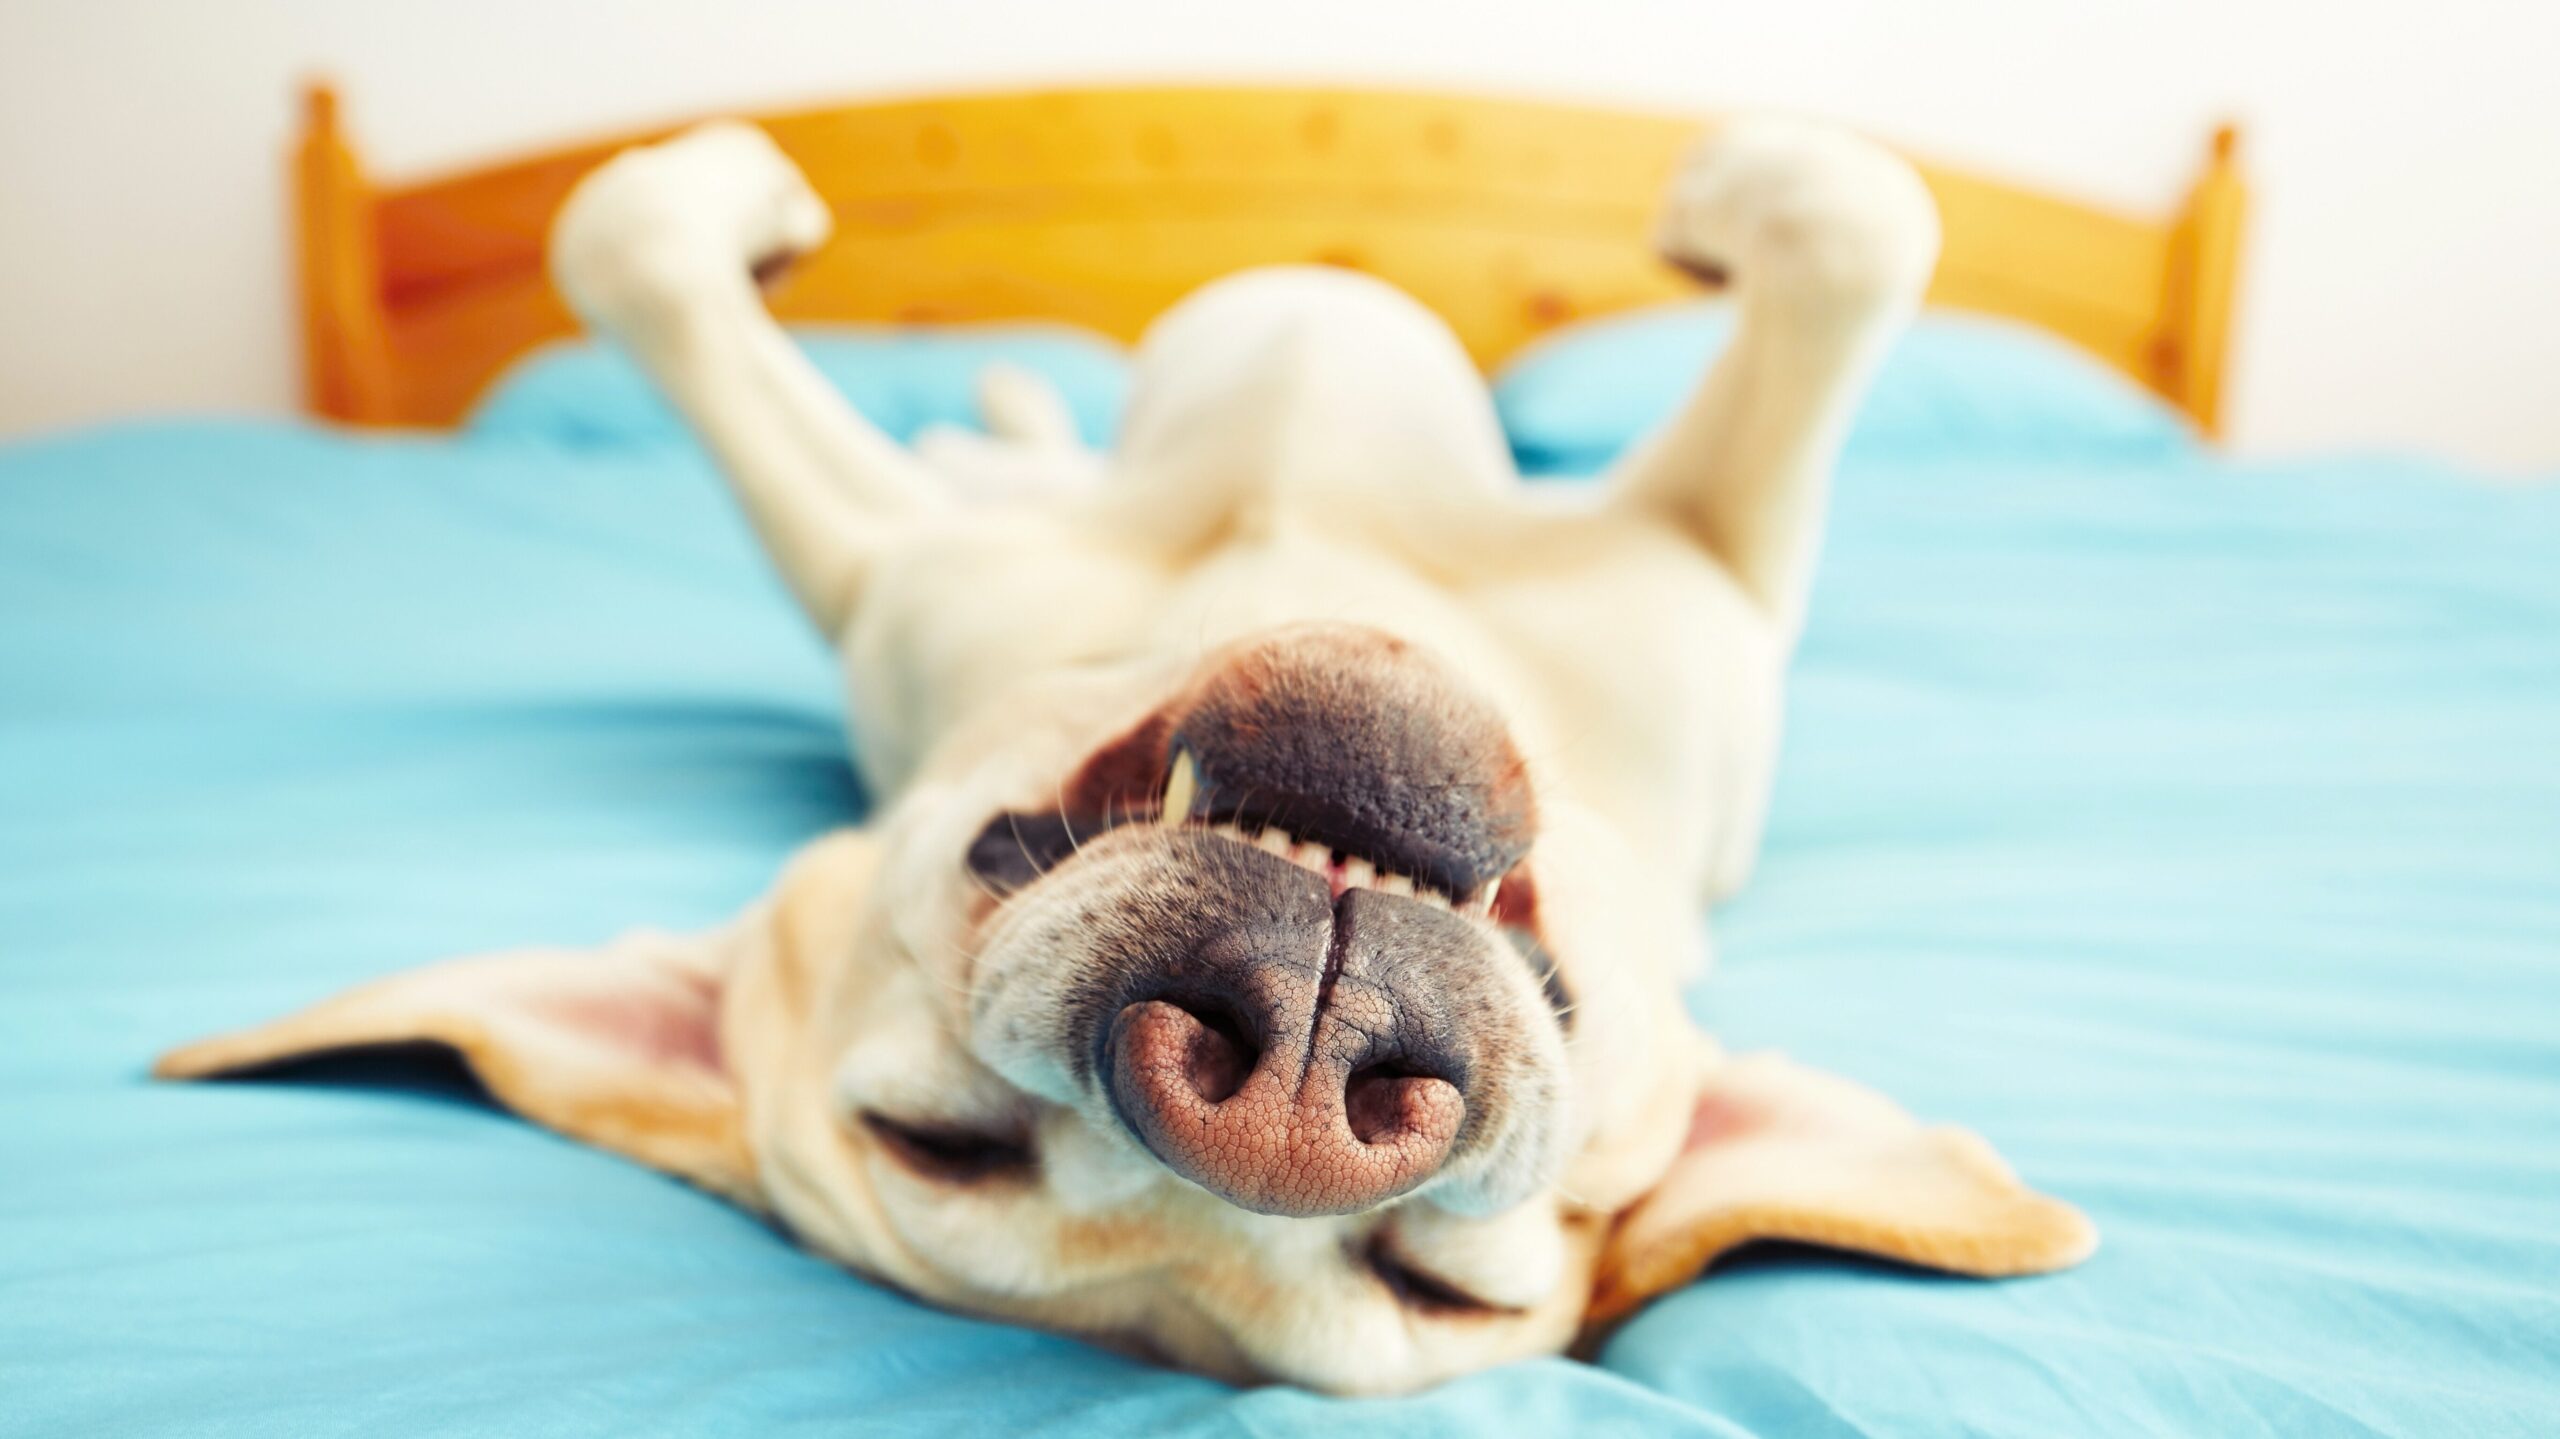 Dog lying upside down on a bed. Clearly the dog is happy and must enjoy the benefits of his owners signing up for a vet wellness plan! 